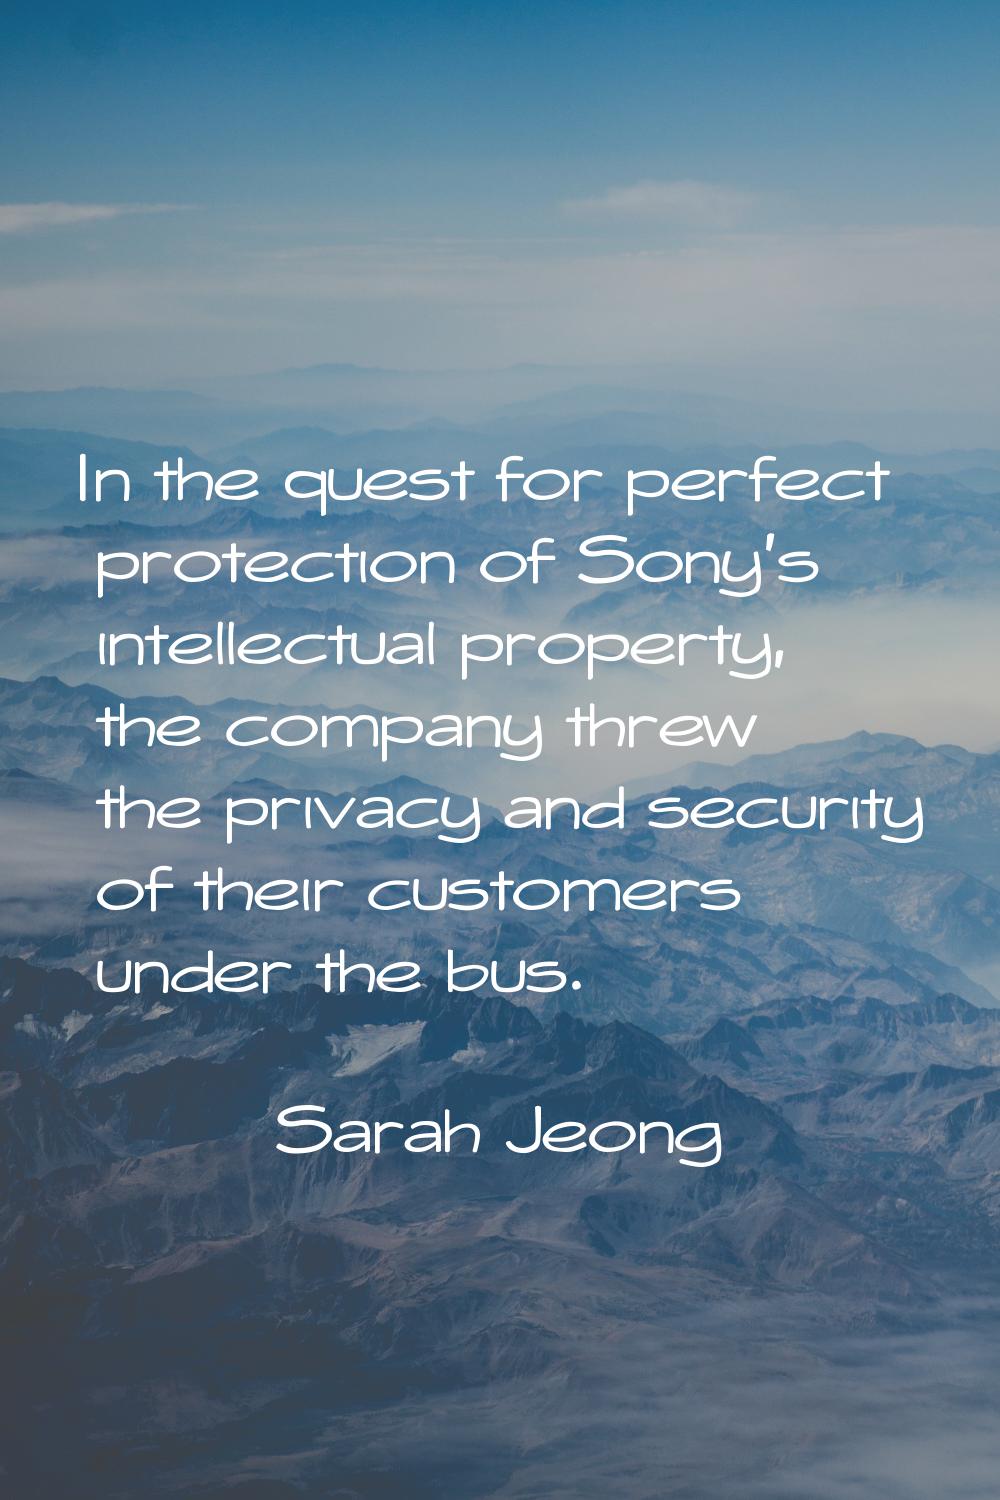 In the quest for perfect protection of Sony's intellectual property, the company threw the privacy 